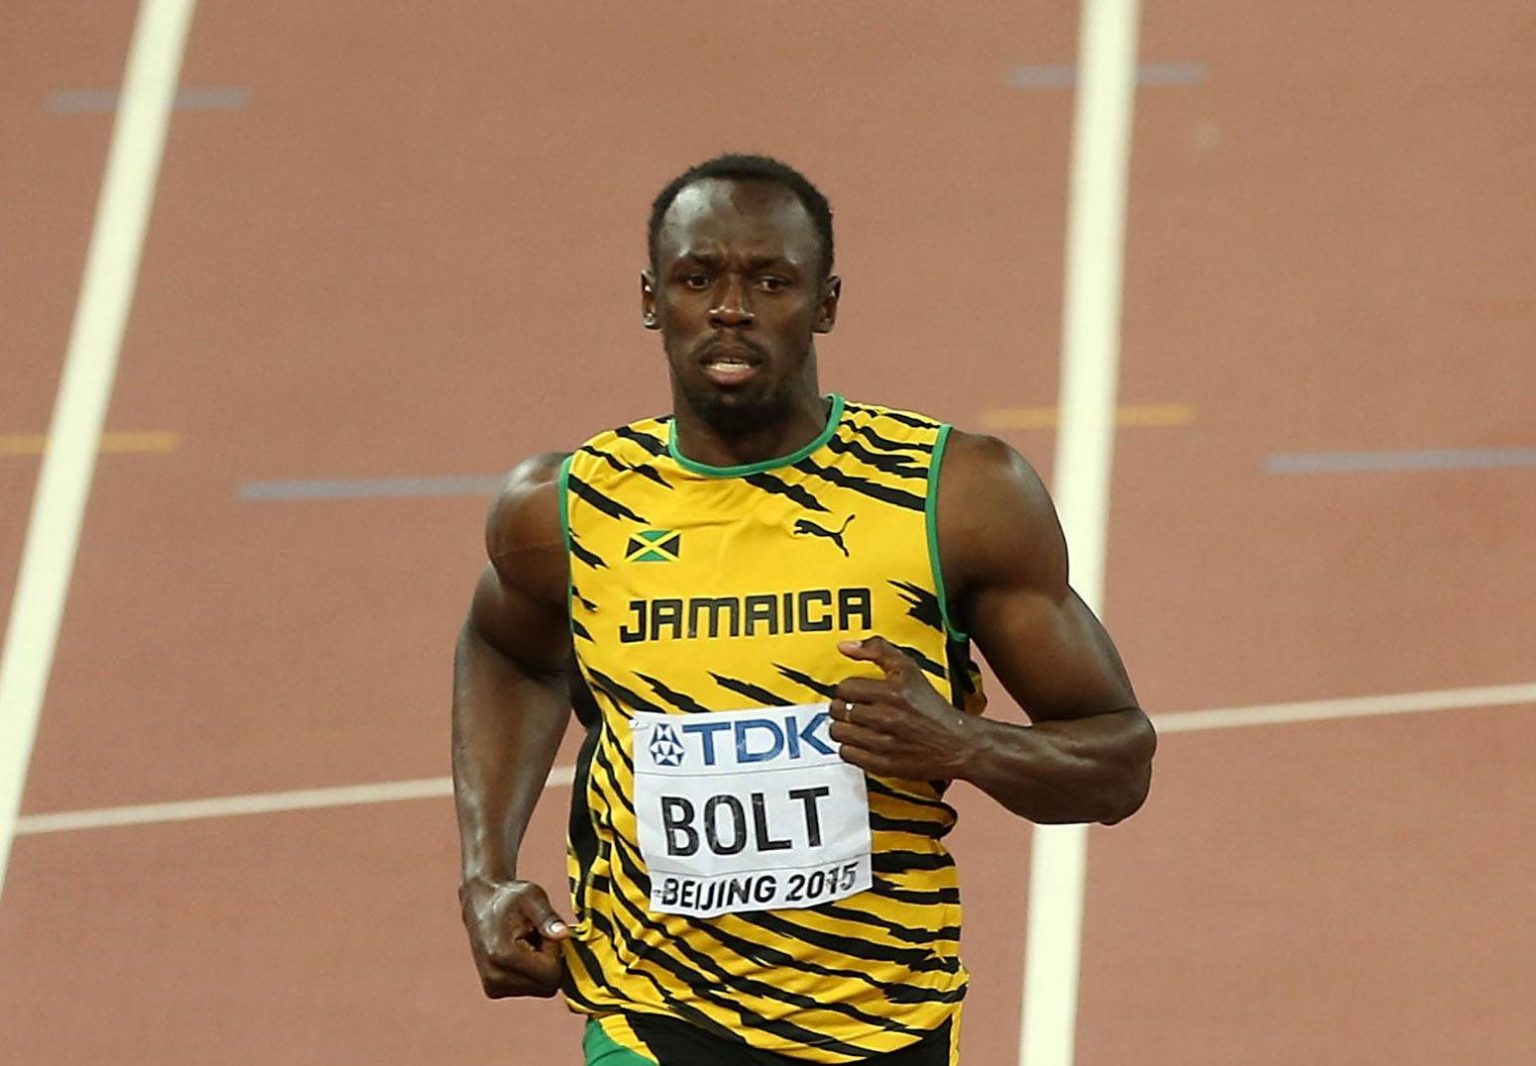 World’s Fastest Man Usain Bolt Gets Back on The Track at “Run The World